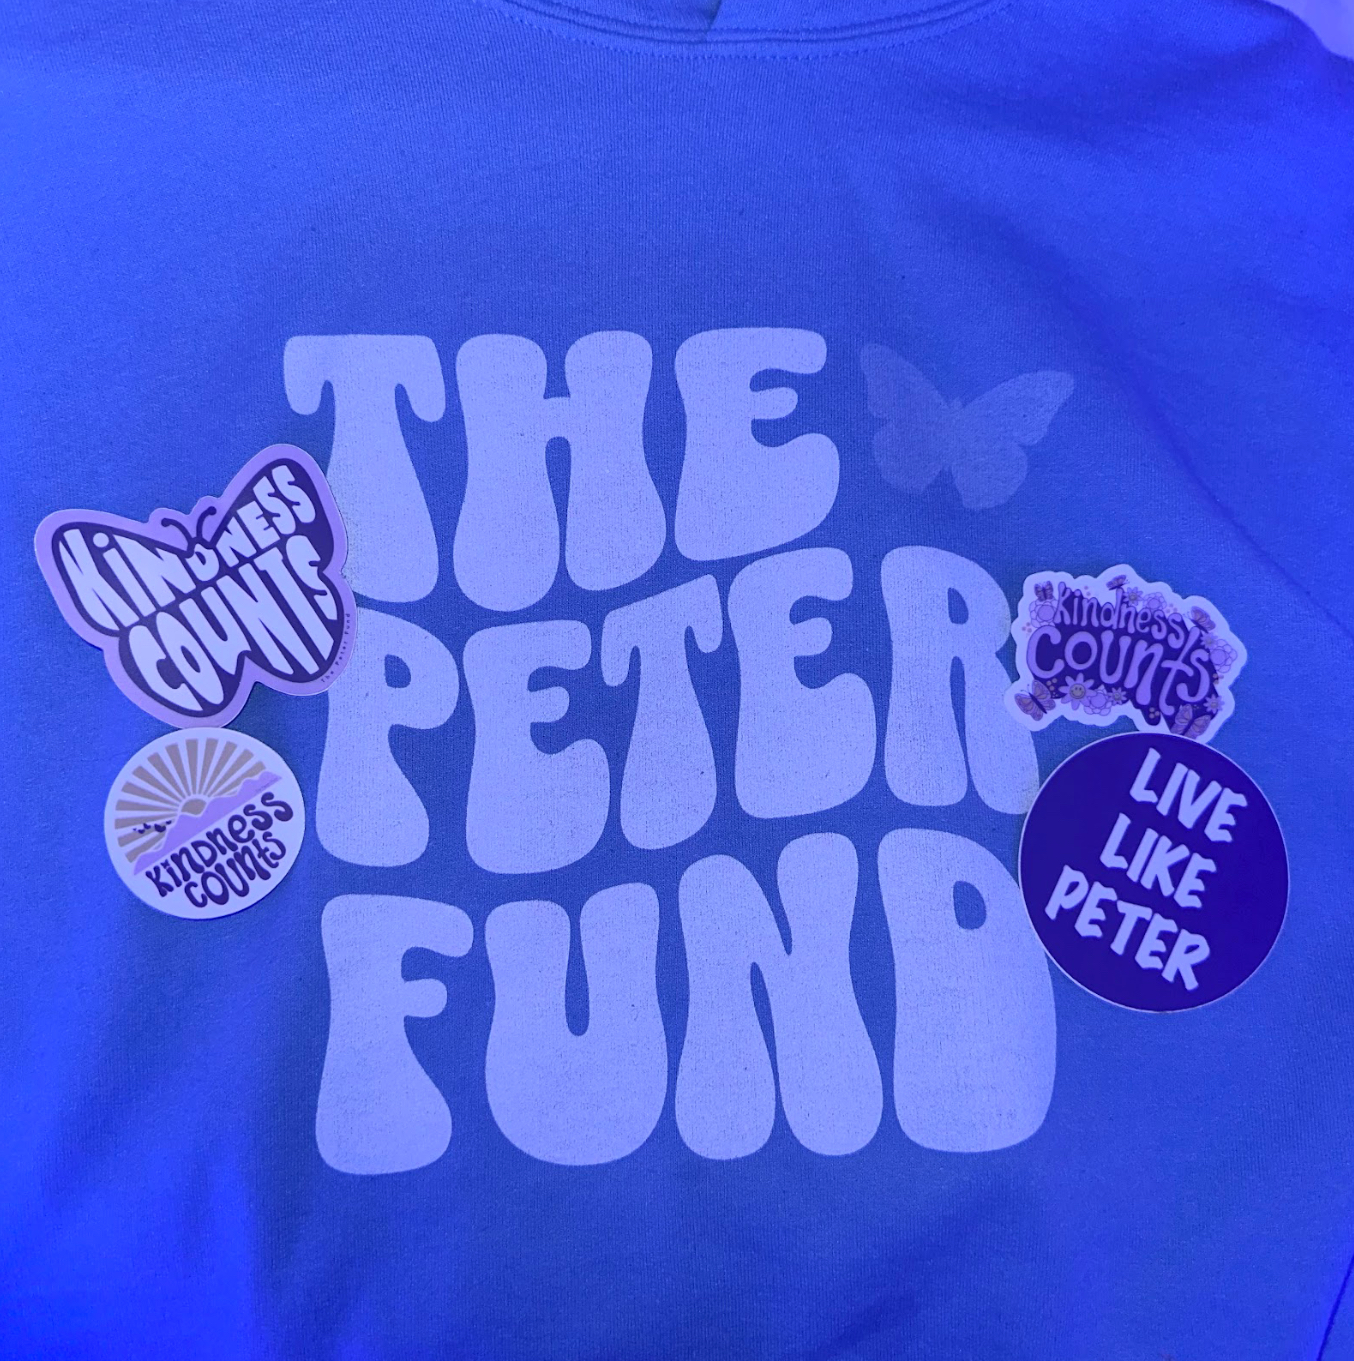 ThePeterFund’s website features the merchandise they have for purchase.